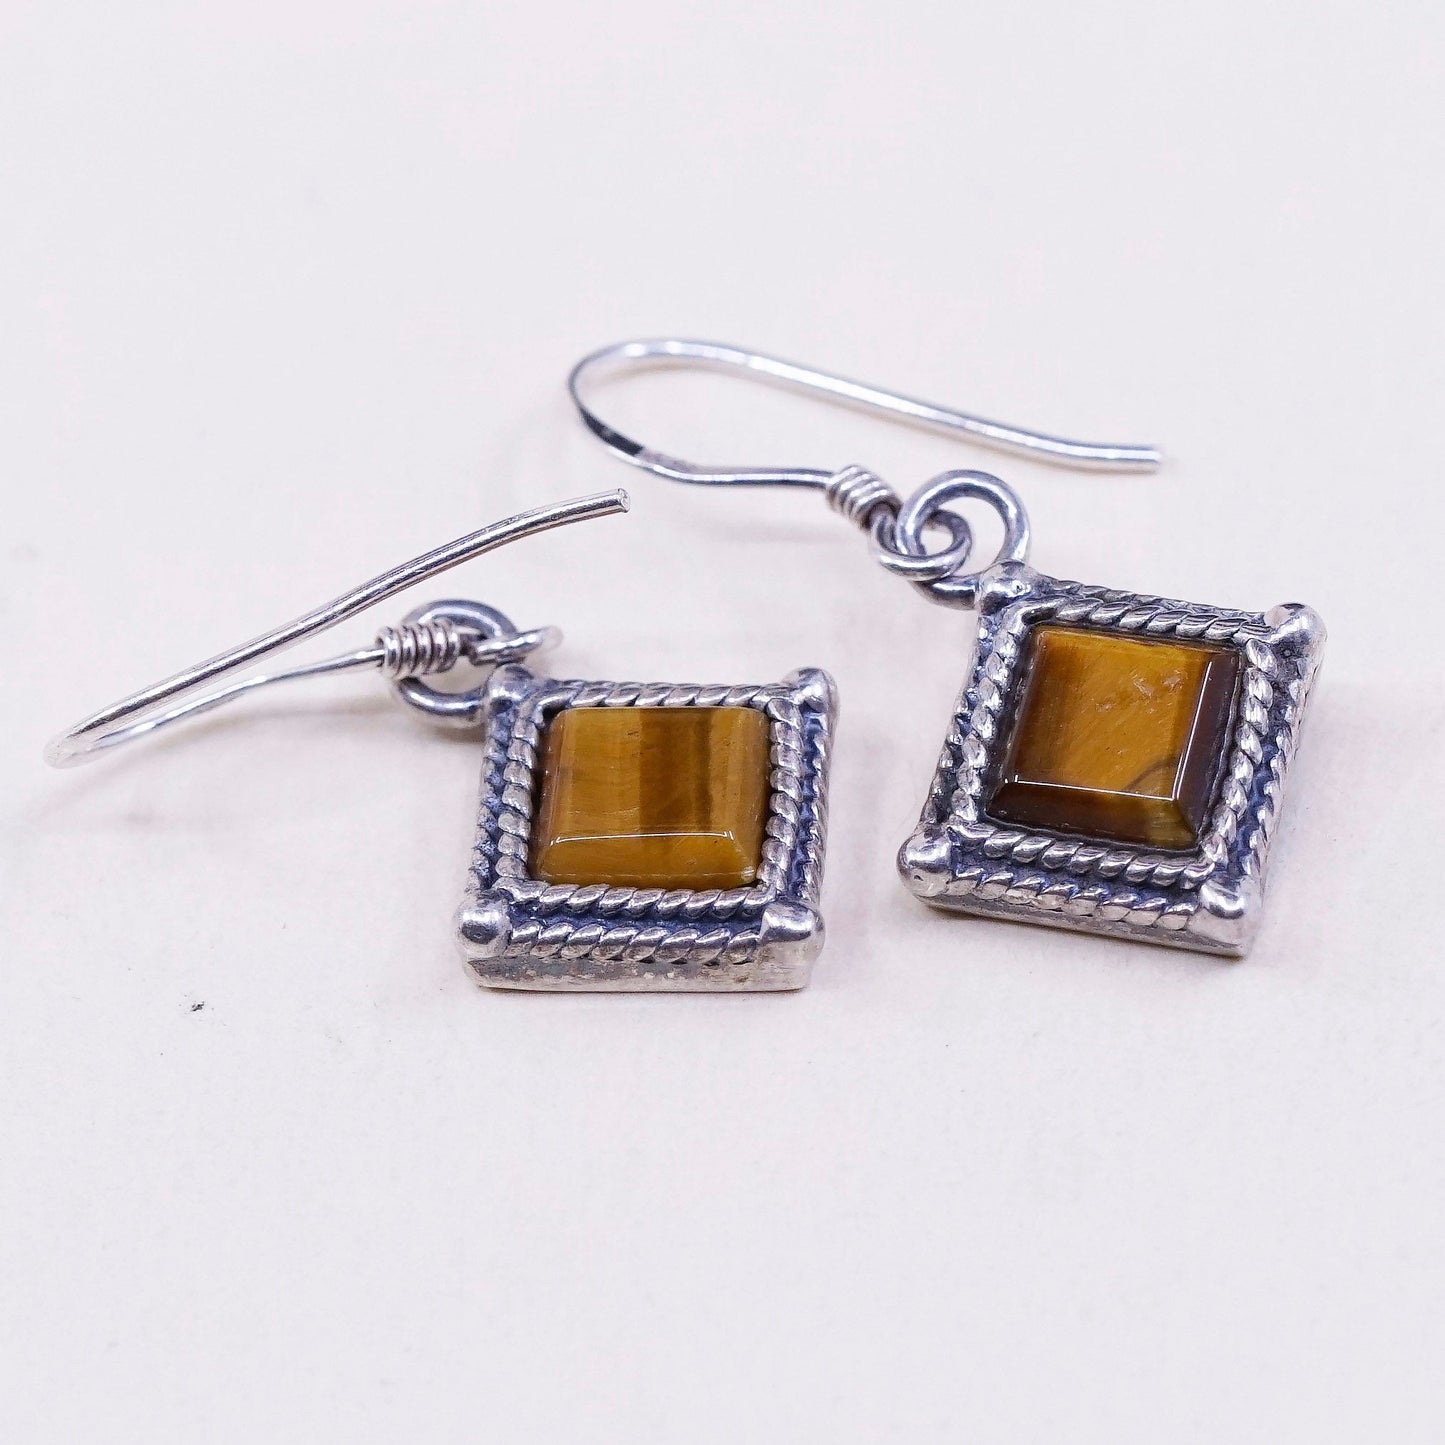 Vintage Sterling 925 silver handmade earrings with square tiger eye dangles